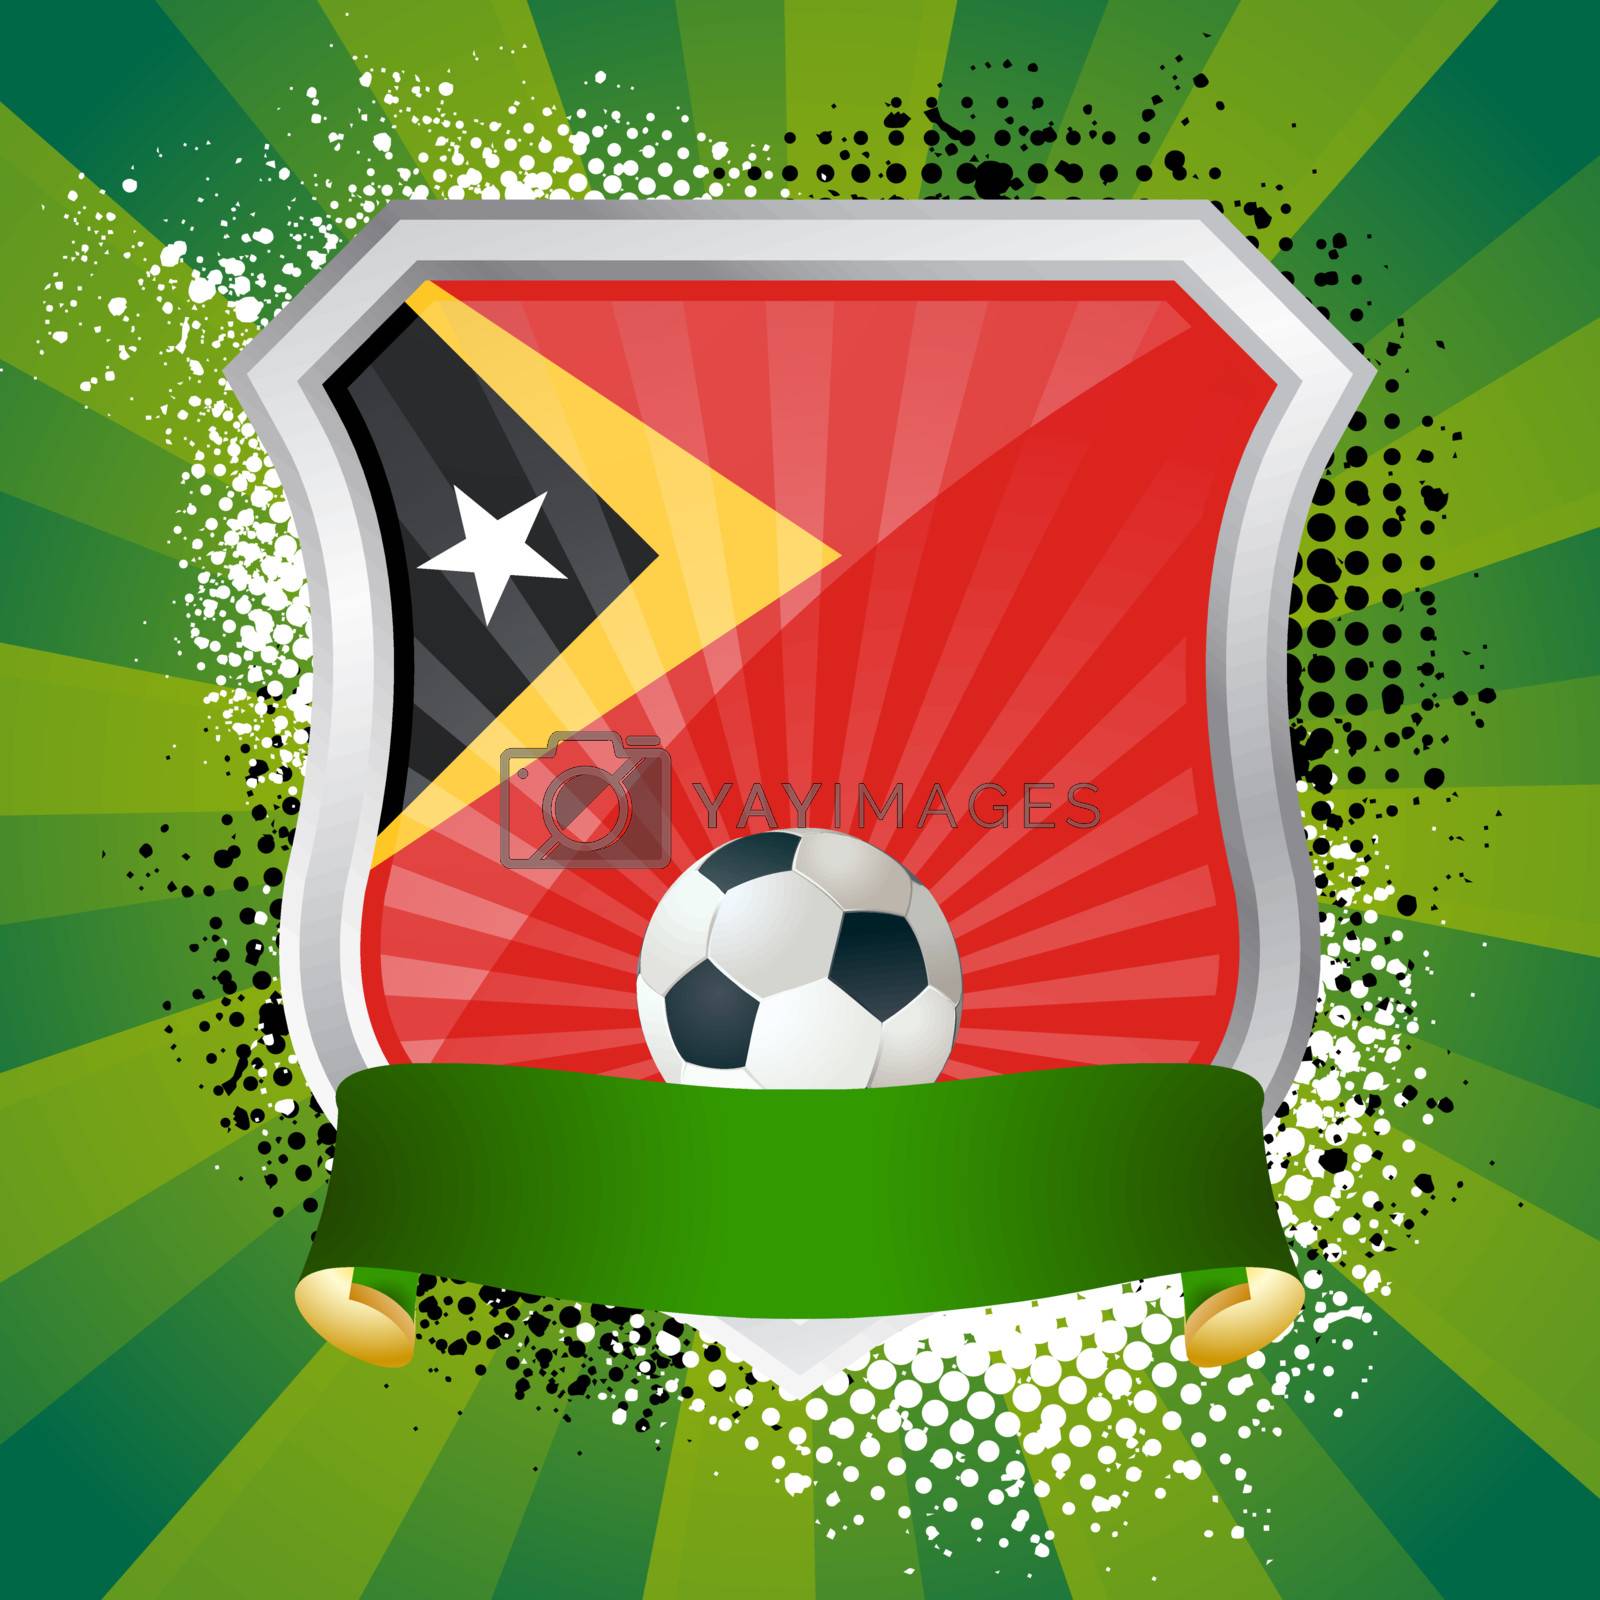 Royalty free image of Shield with flag of Timor-Leste by Petrov_Vladimir